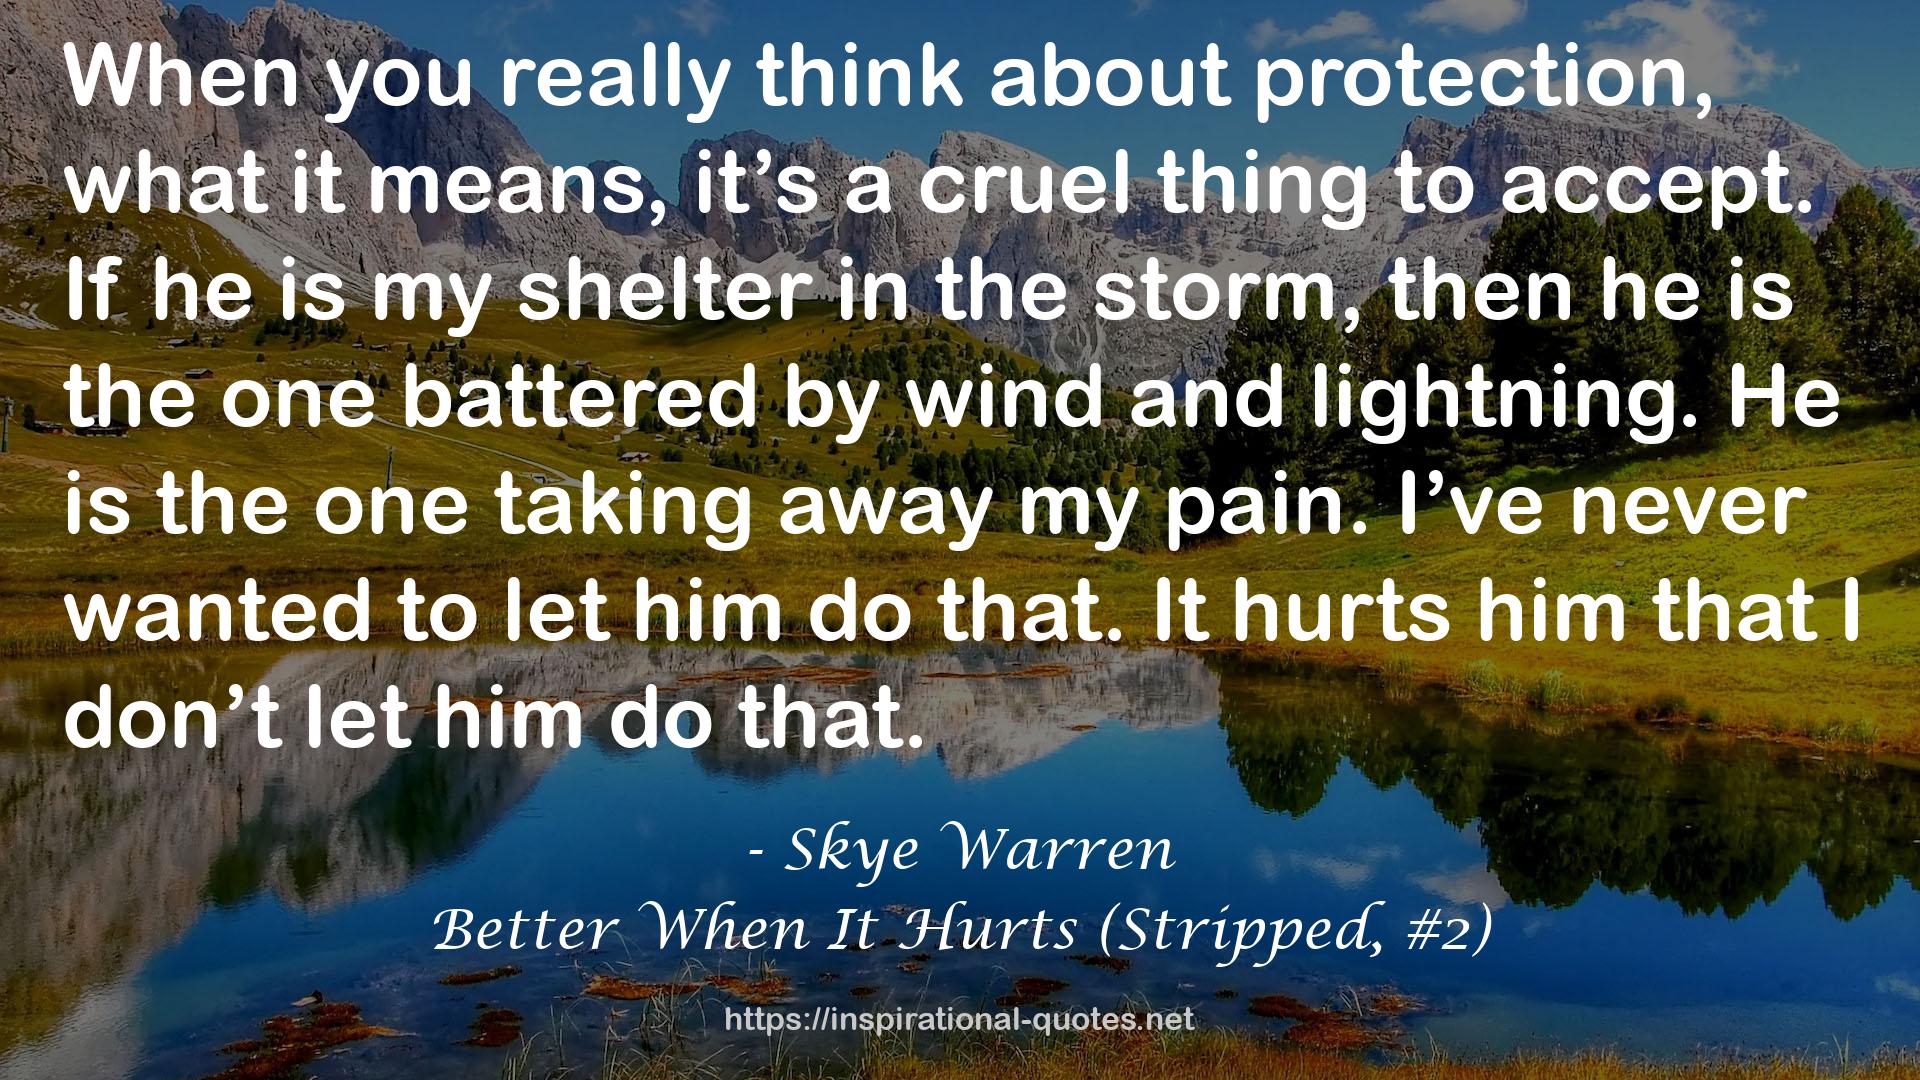 Better When It Hurts (Stripped, #2) QUOTES